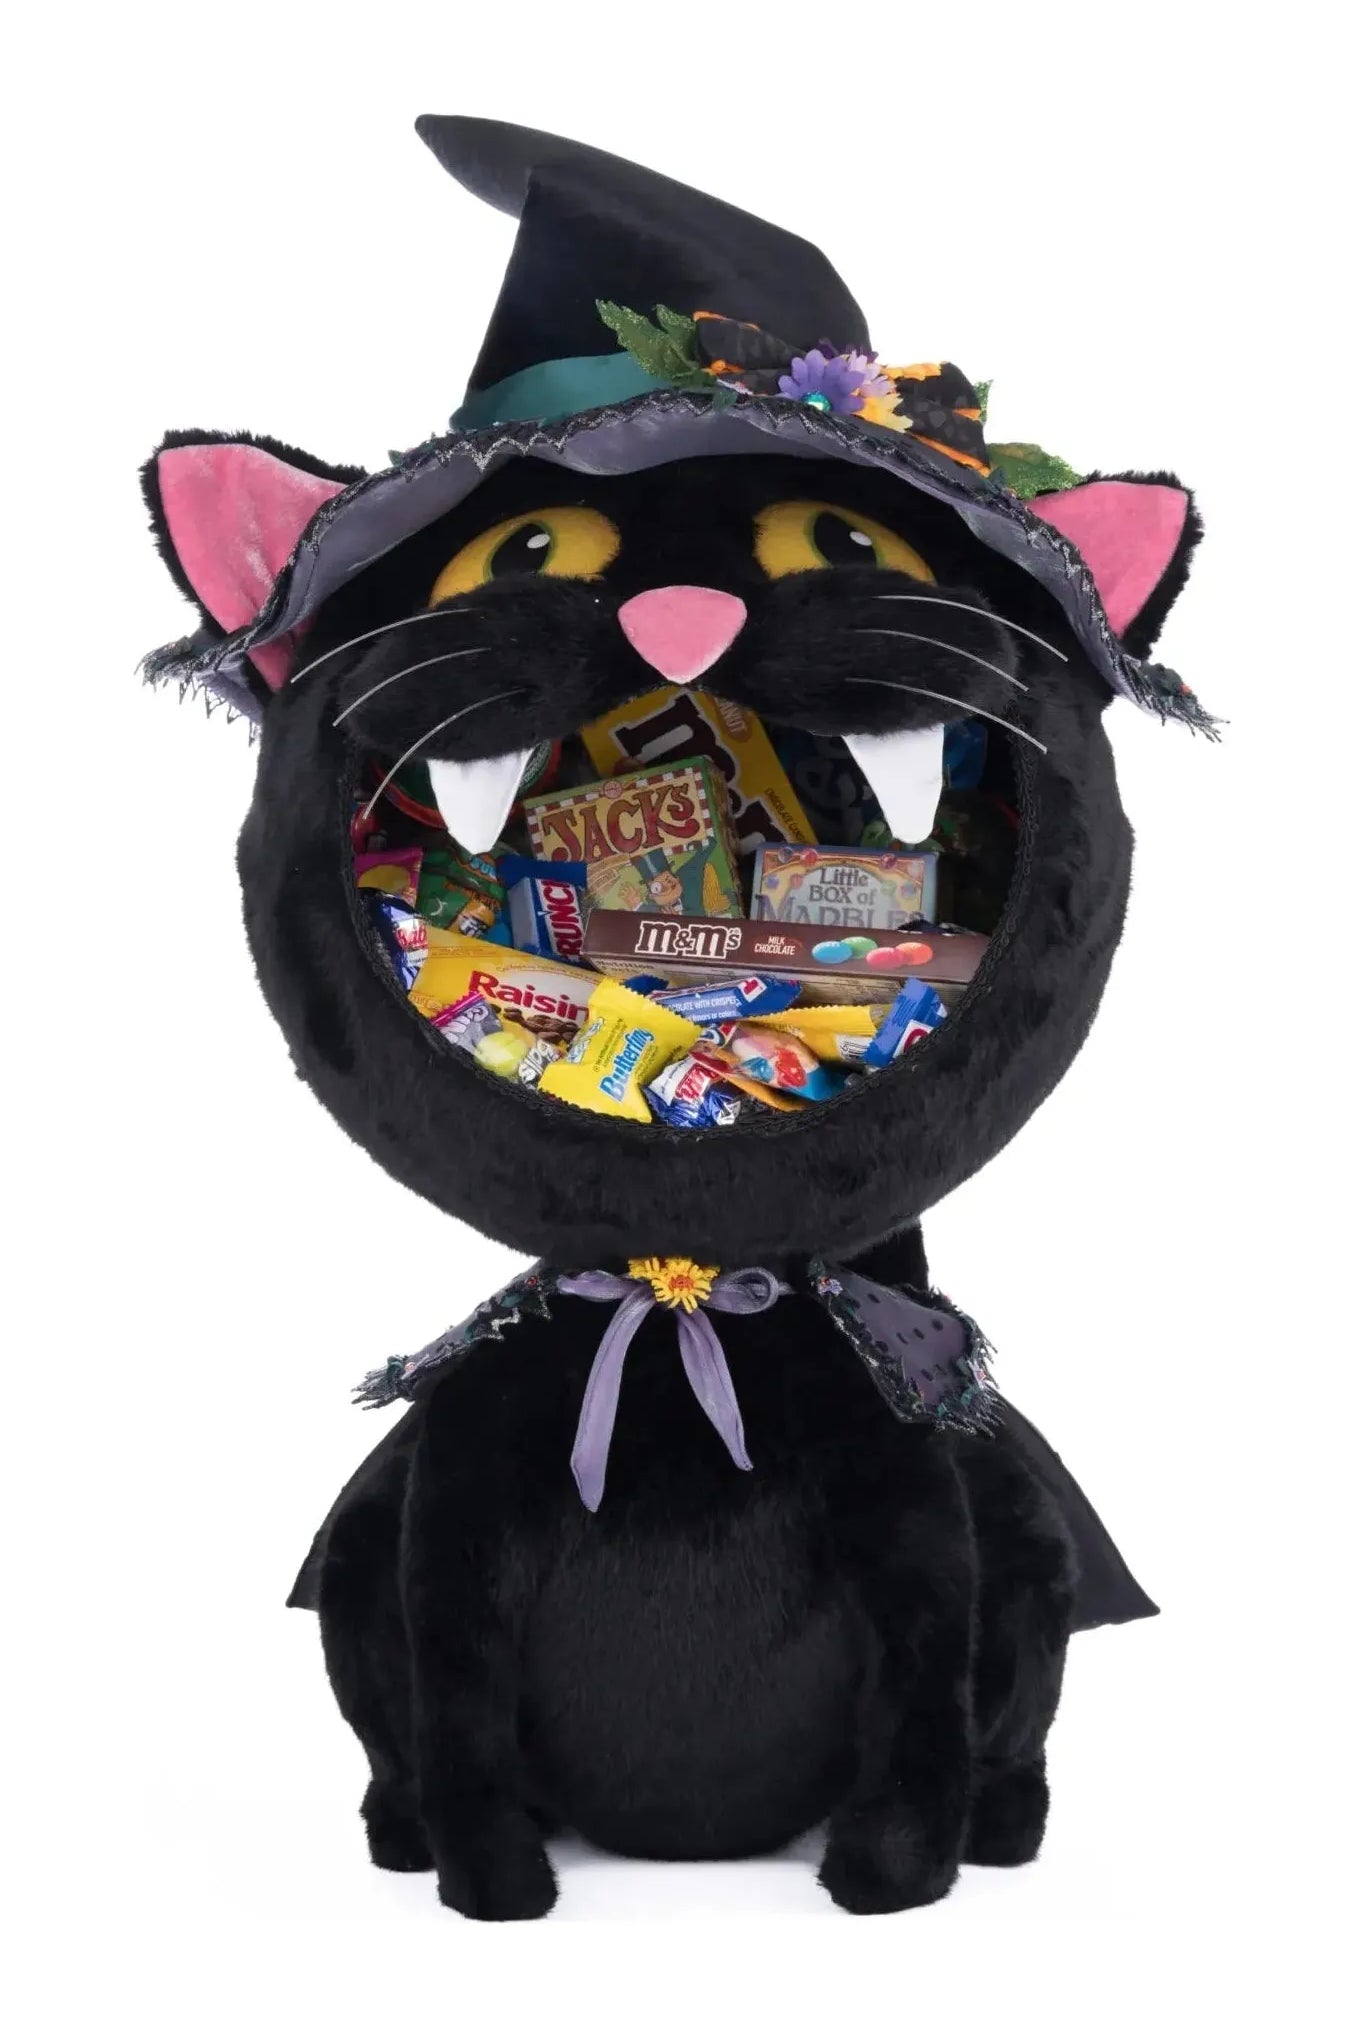 Shop For Black Cat Candy Container 28-428189